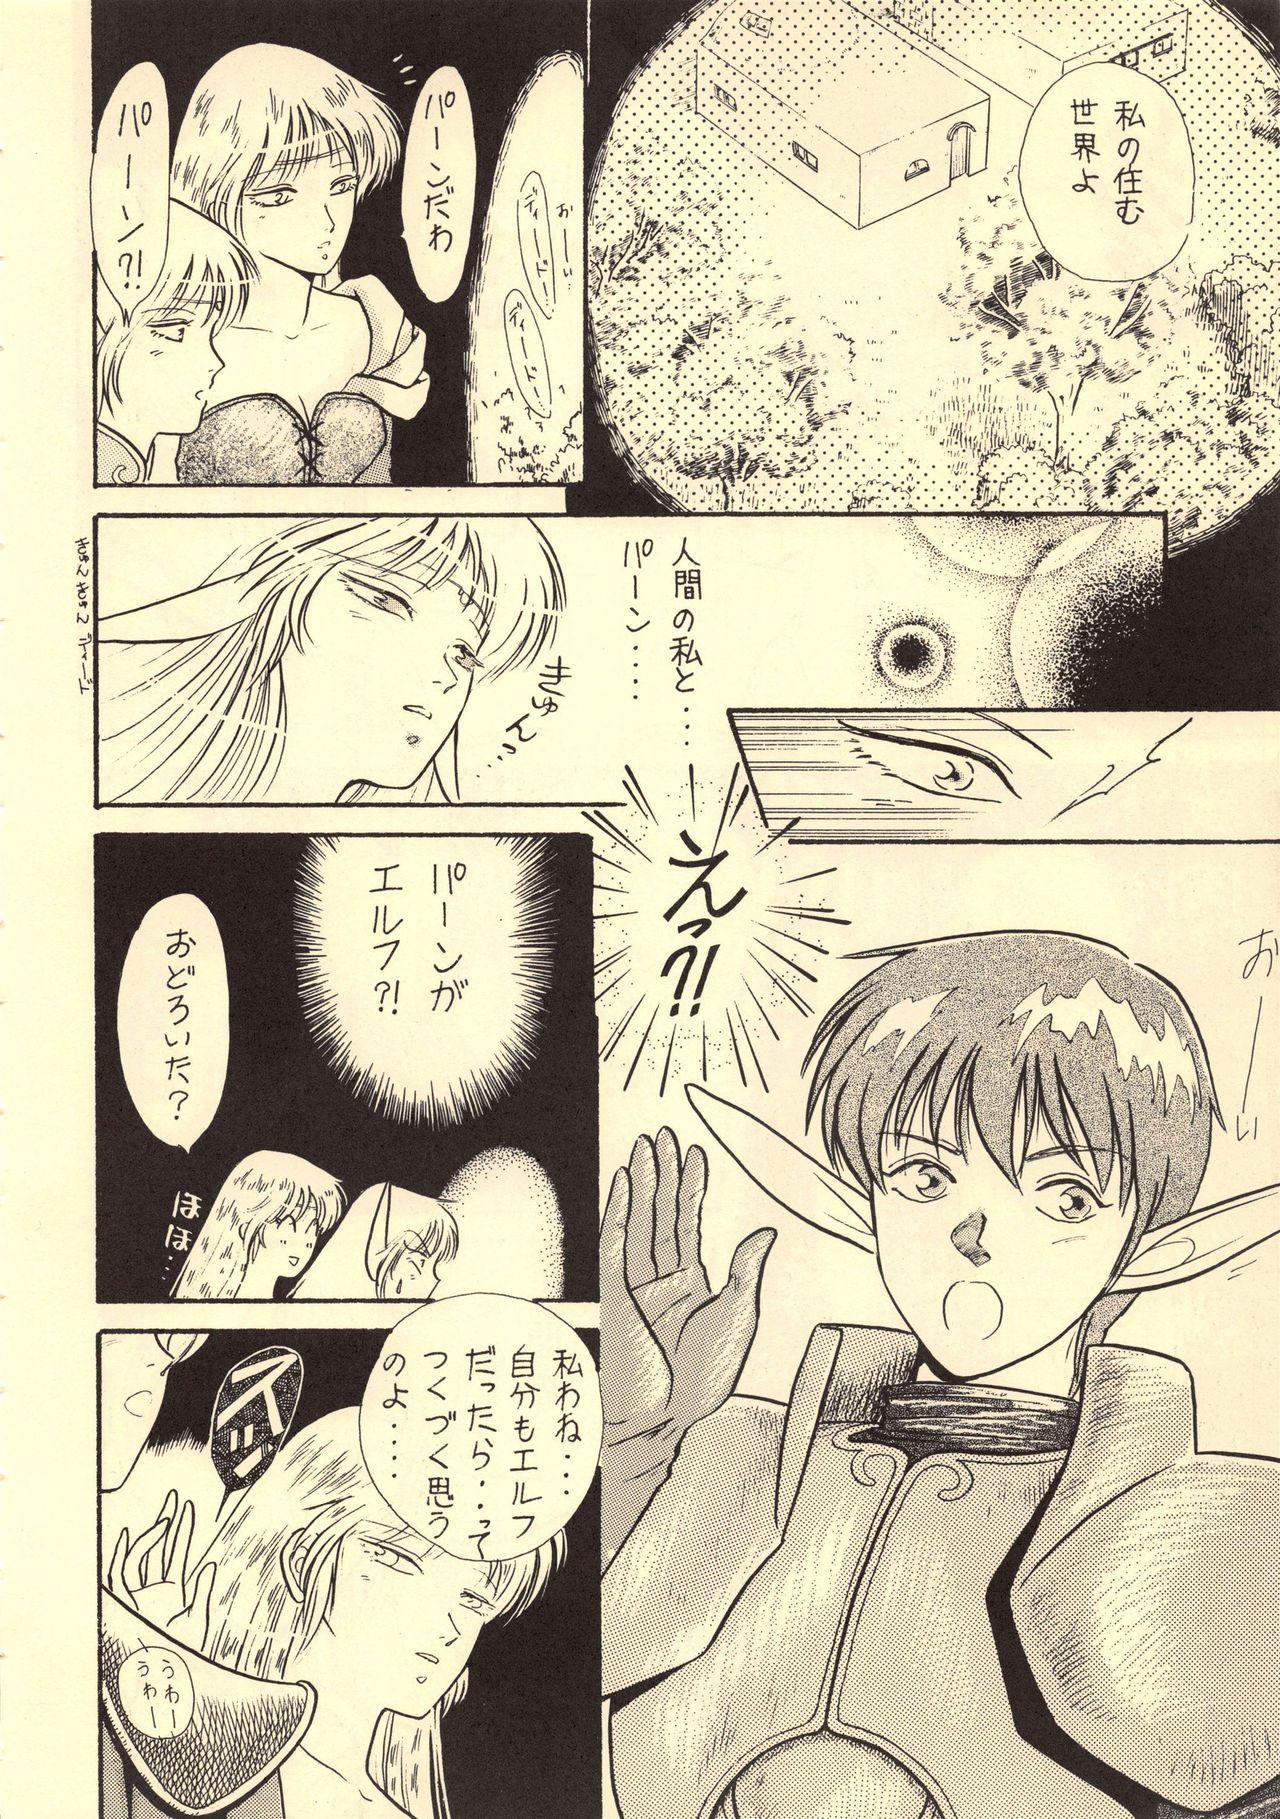 Suck Cock Elf no Musume Kaiteiban - Die Elfische Tochter revised edition - Record of lodoss war Mulher - Page 10